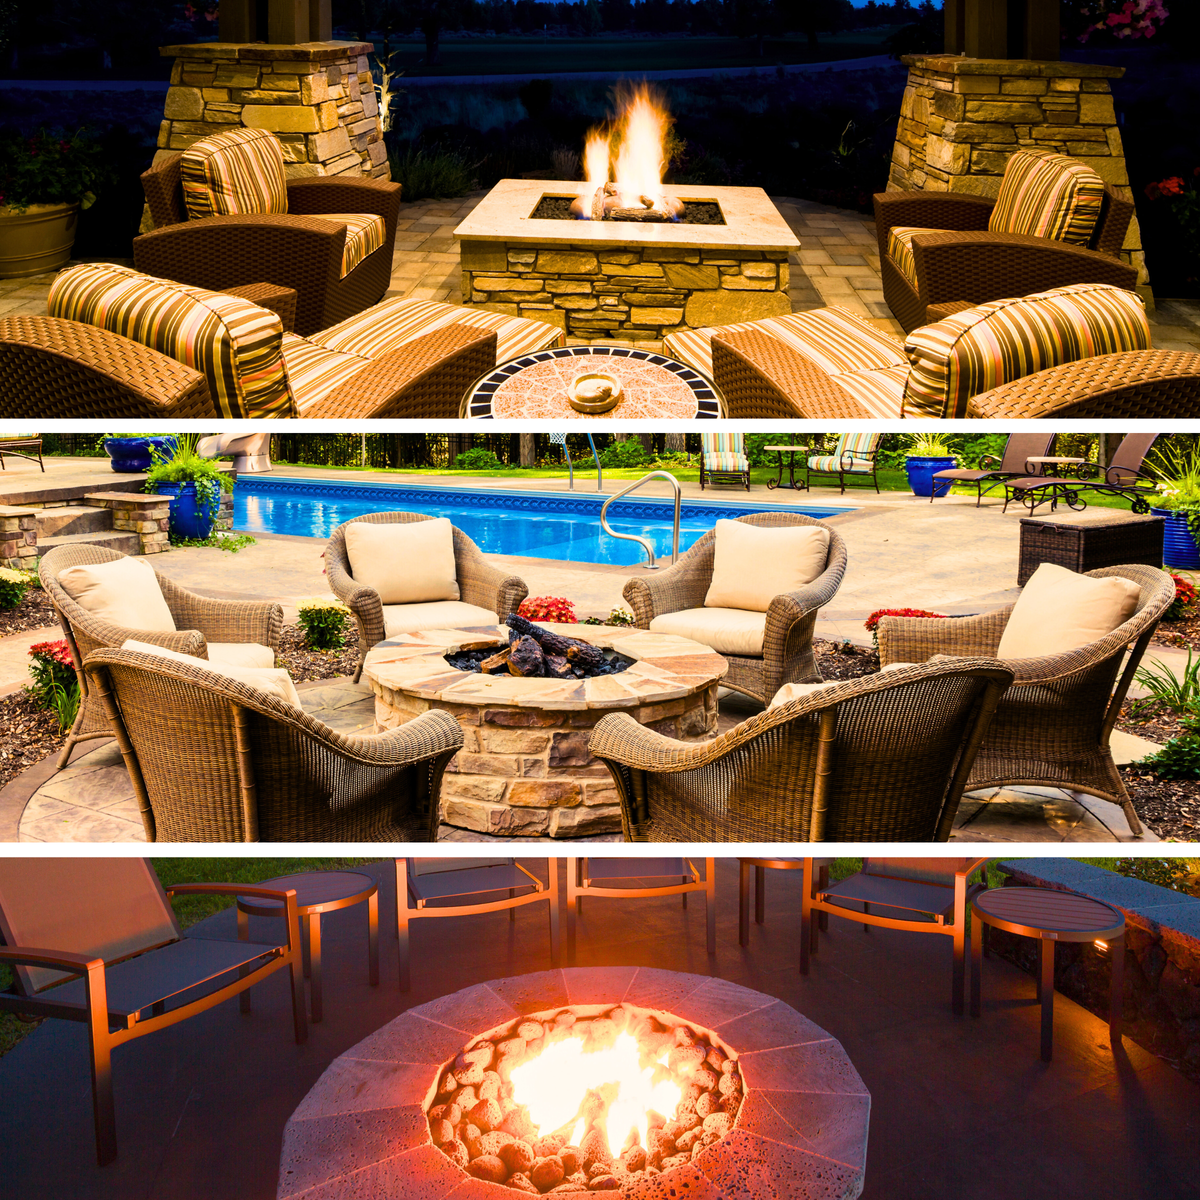 Custom Stone Fire Pits With Seating